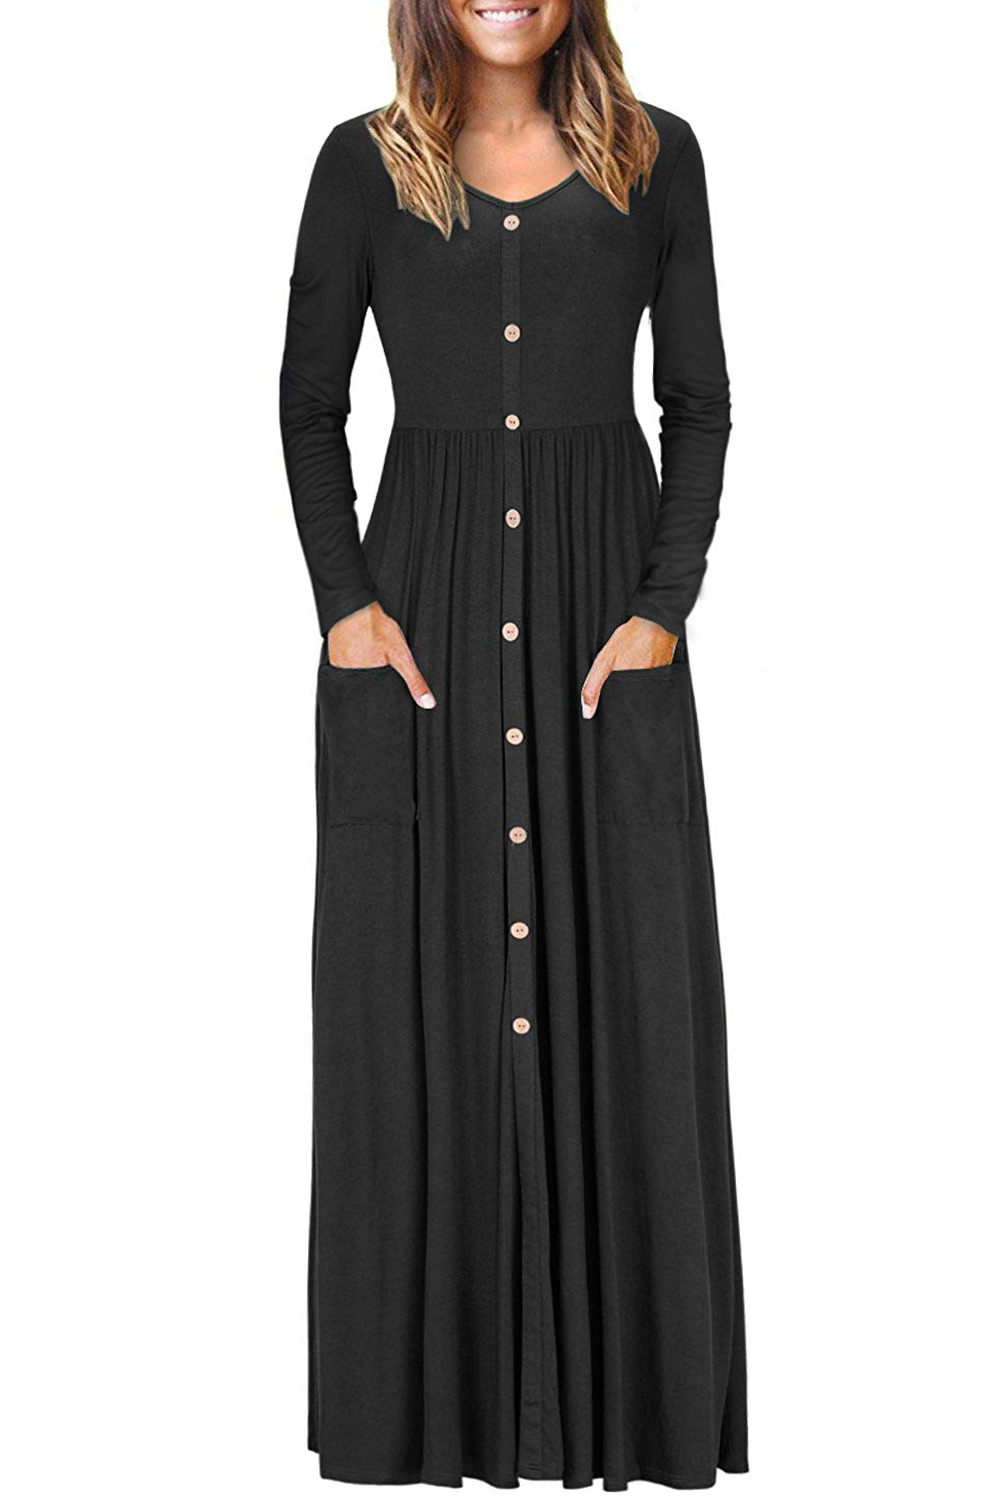 BY610503-2 Hunter  Button Front Pocket Style Casual Long Dress